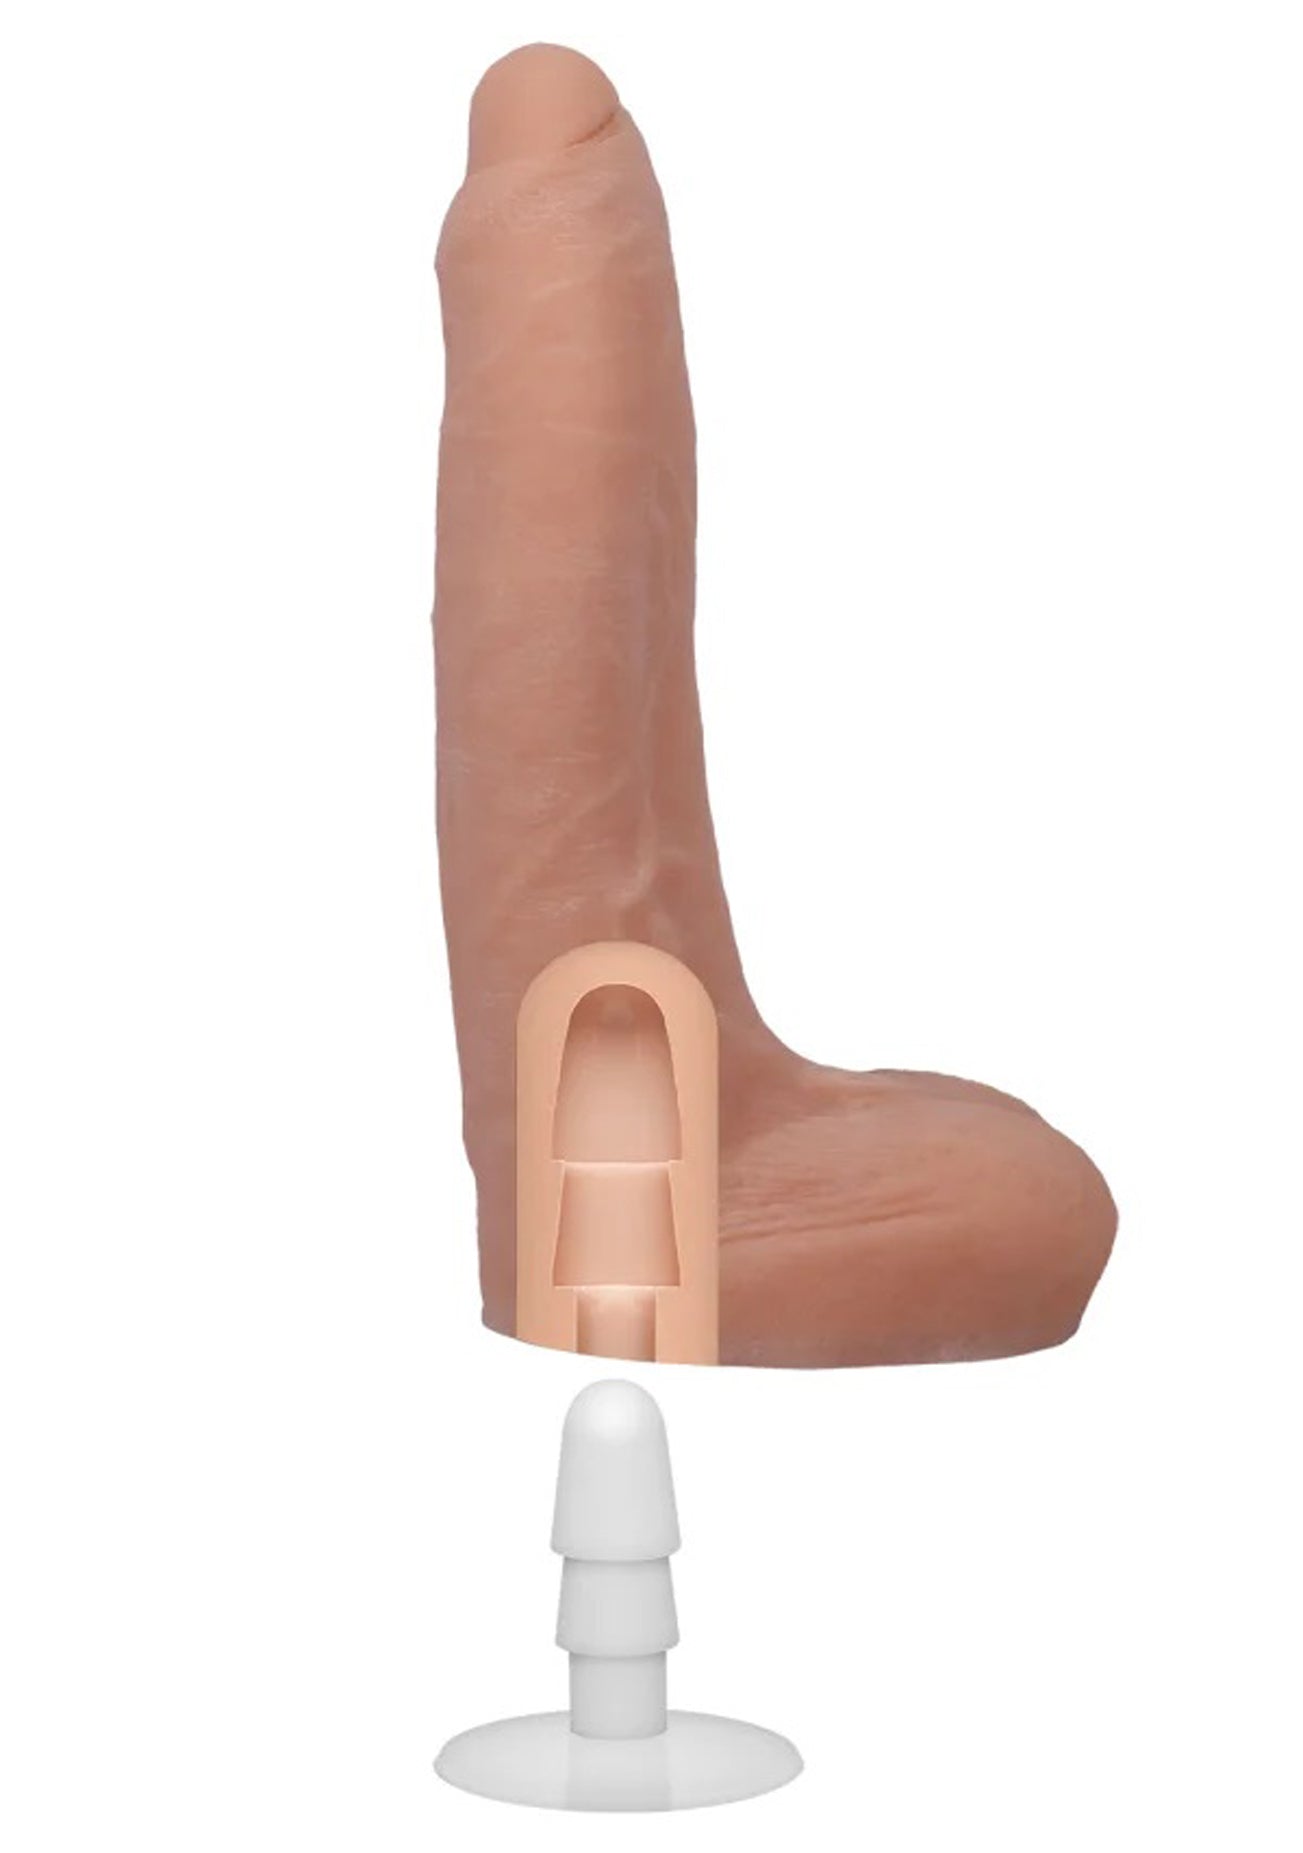 Signature Cocks - Owen Gray - 9 Inch Ultraskyn  Cock With Removable Vac-U-Lock Suction Cup - Skin Tone-0